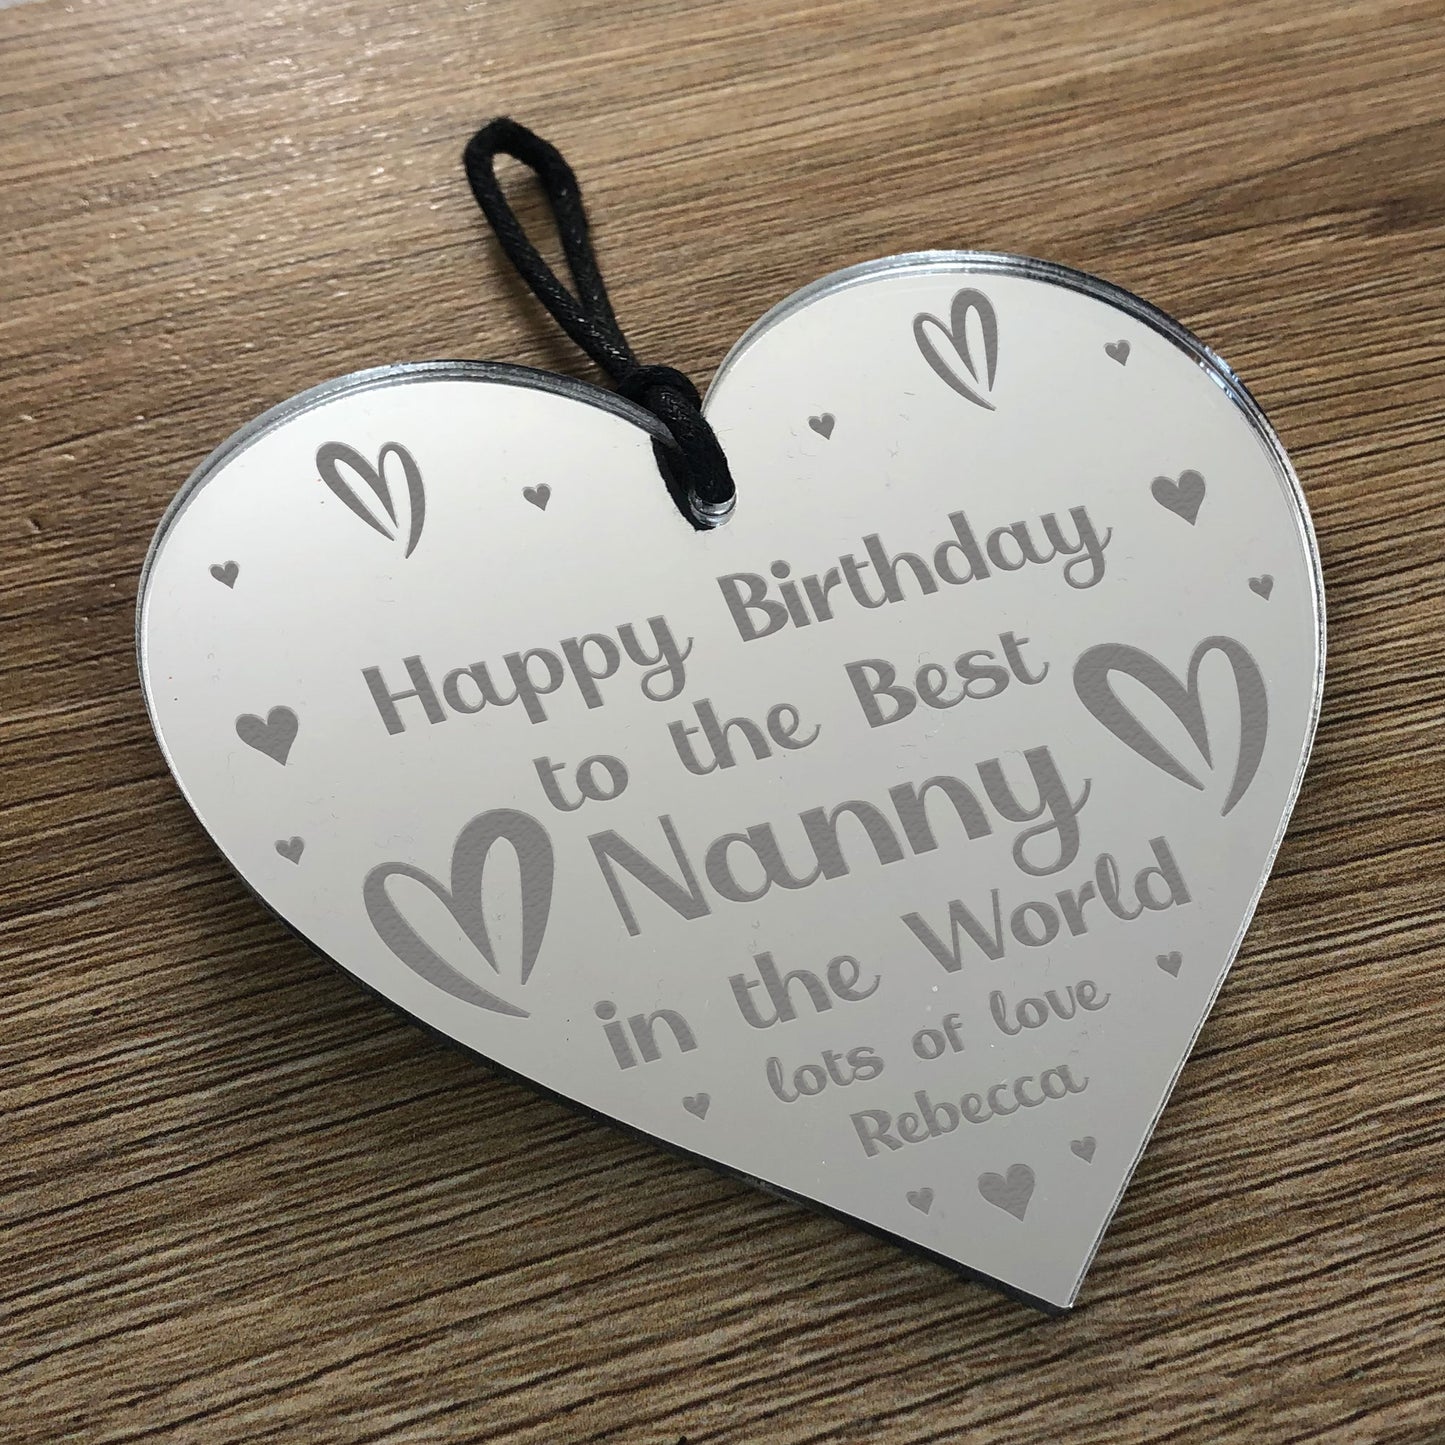 Birthday Gift For Nanny Hanging Engraved Heart Nanny Gift